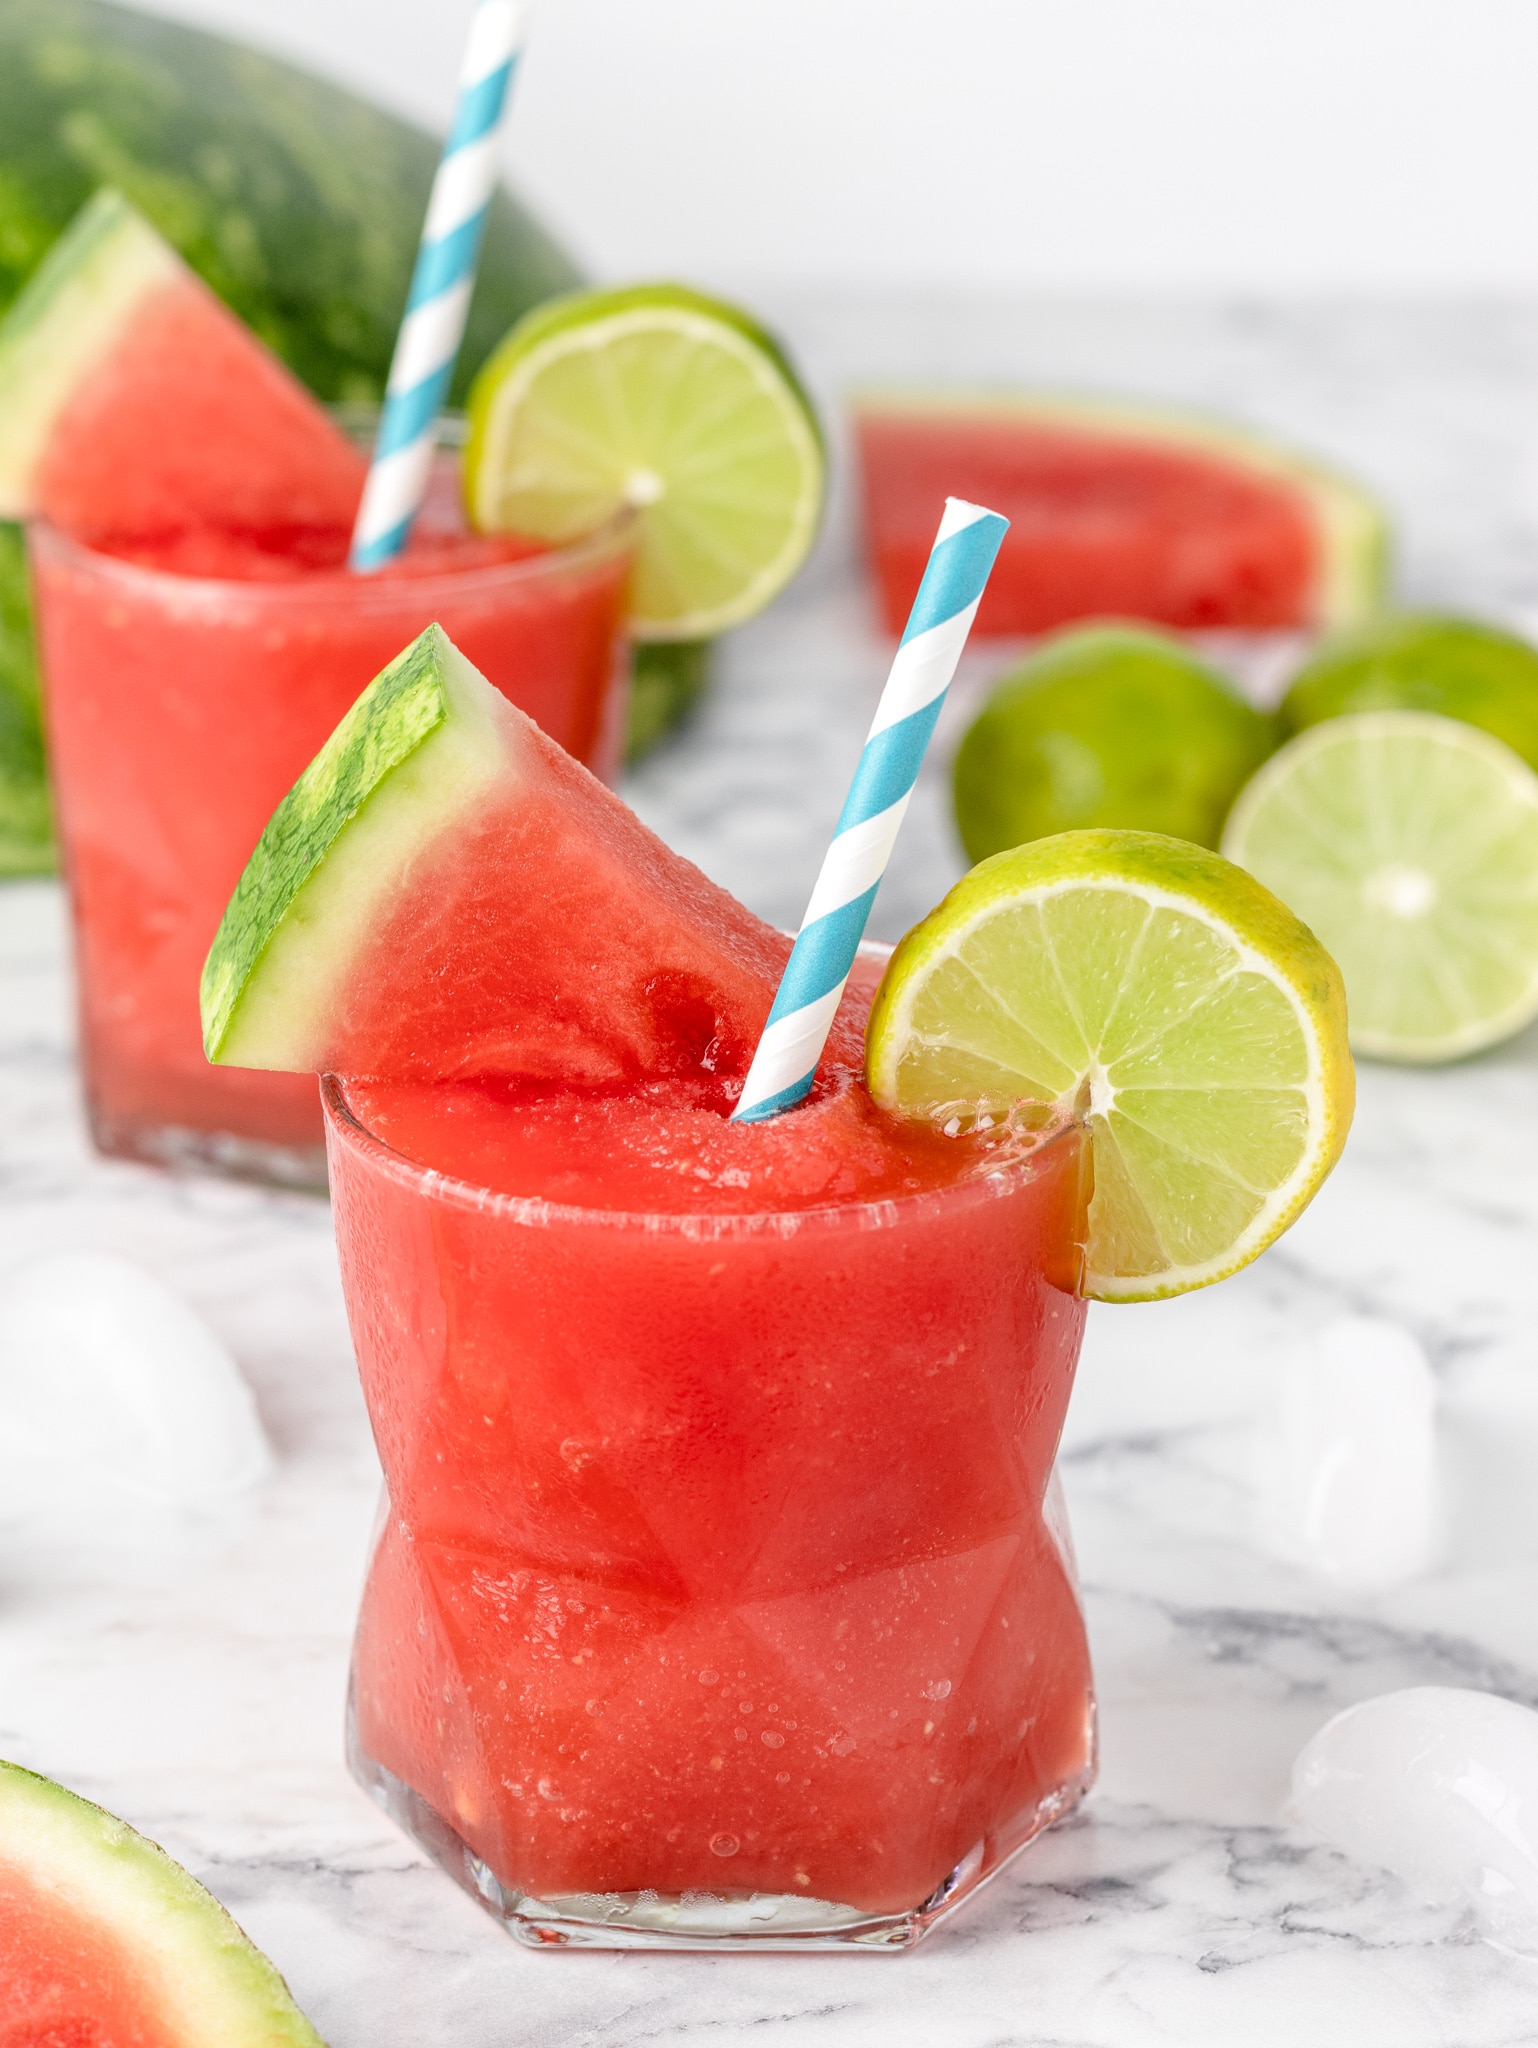 Watermelon Lime Slush in glasses ready for sipping!